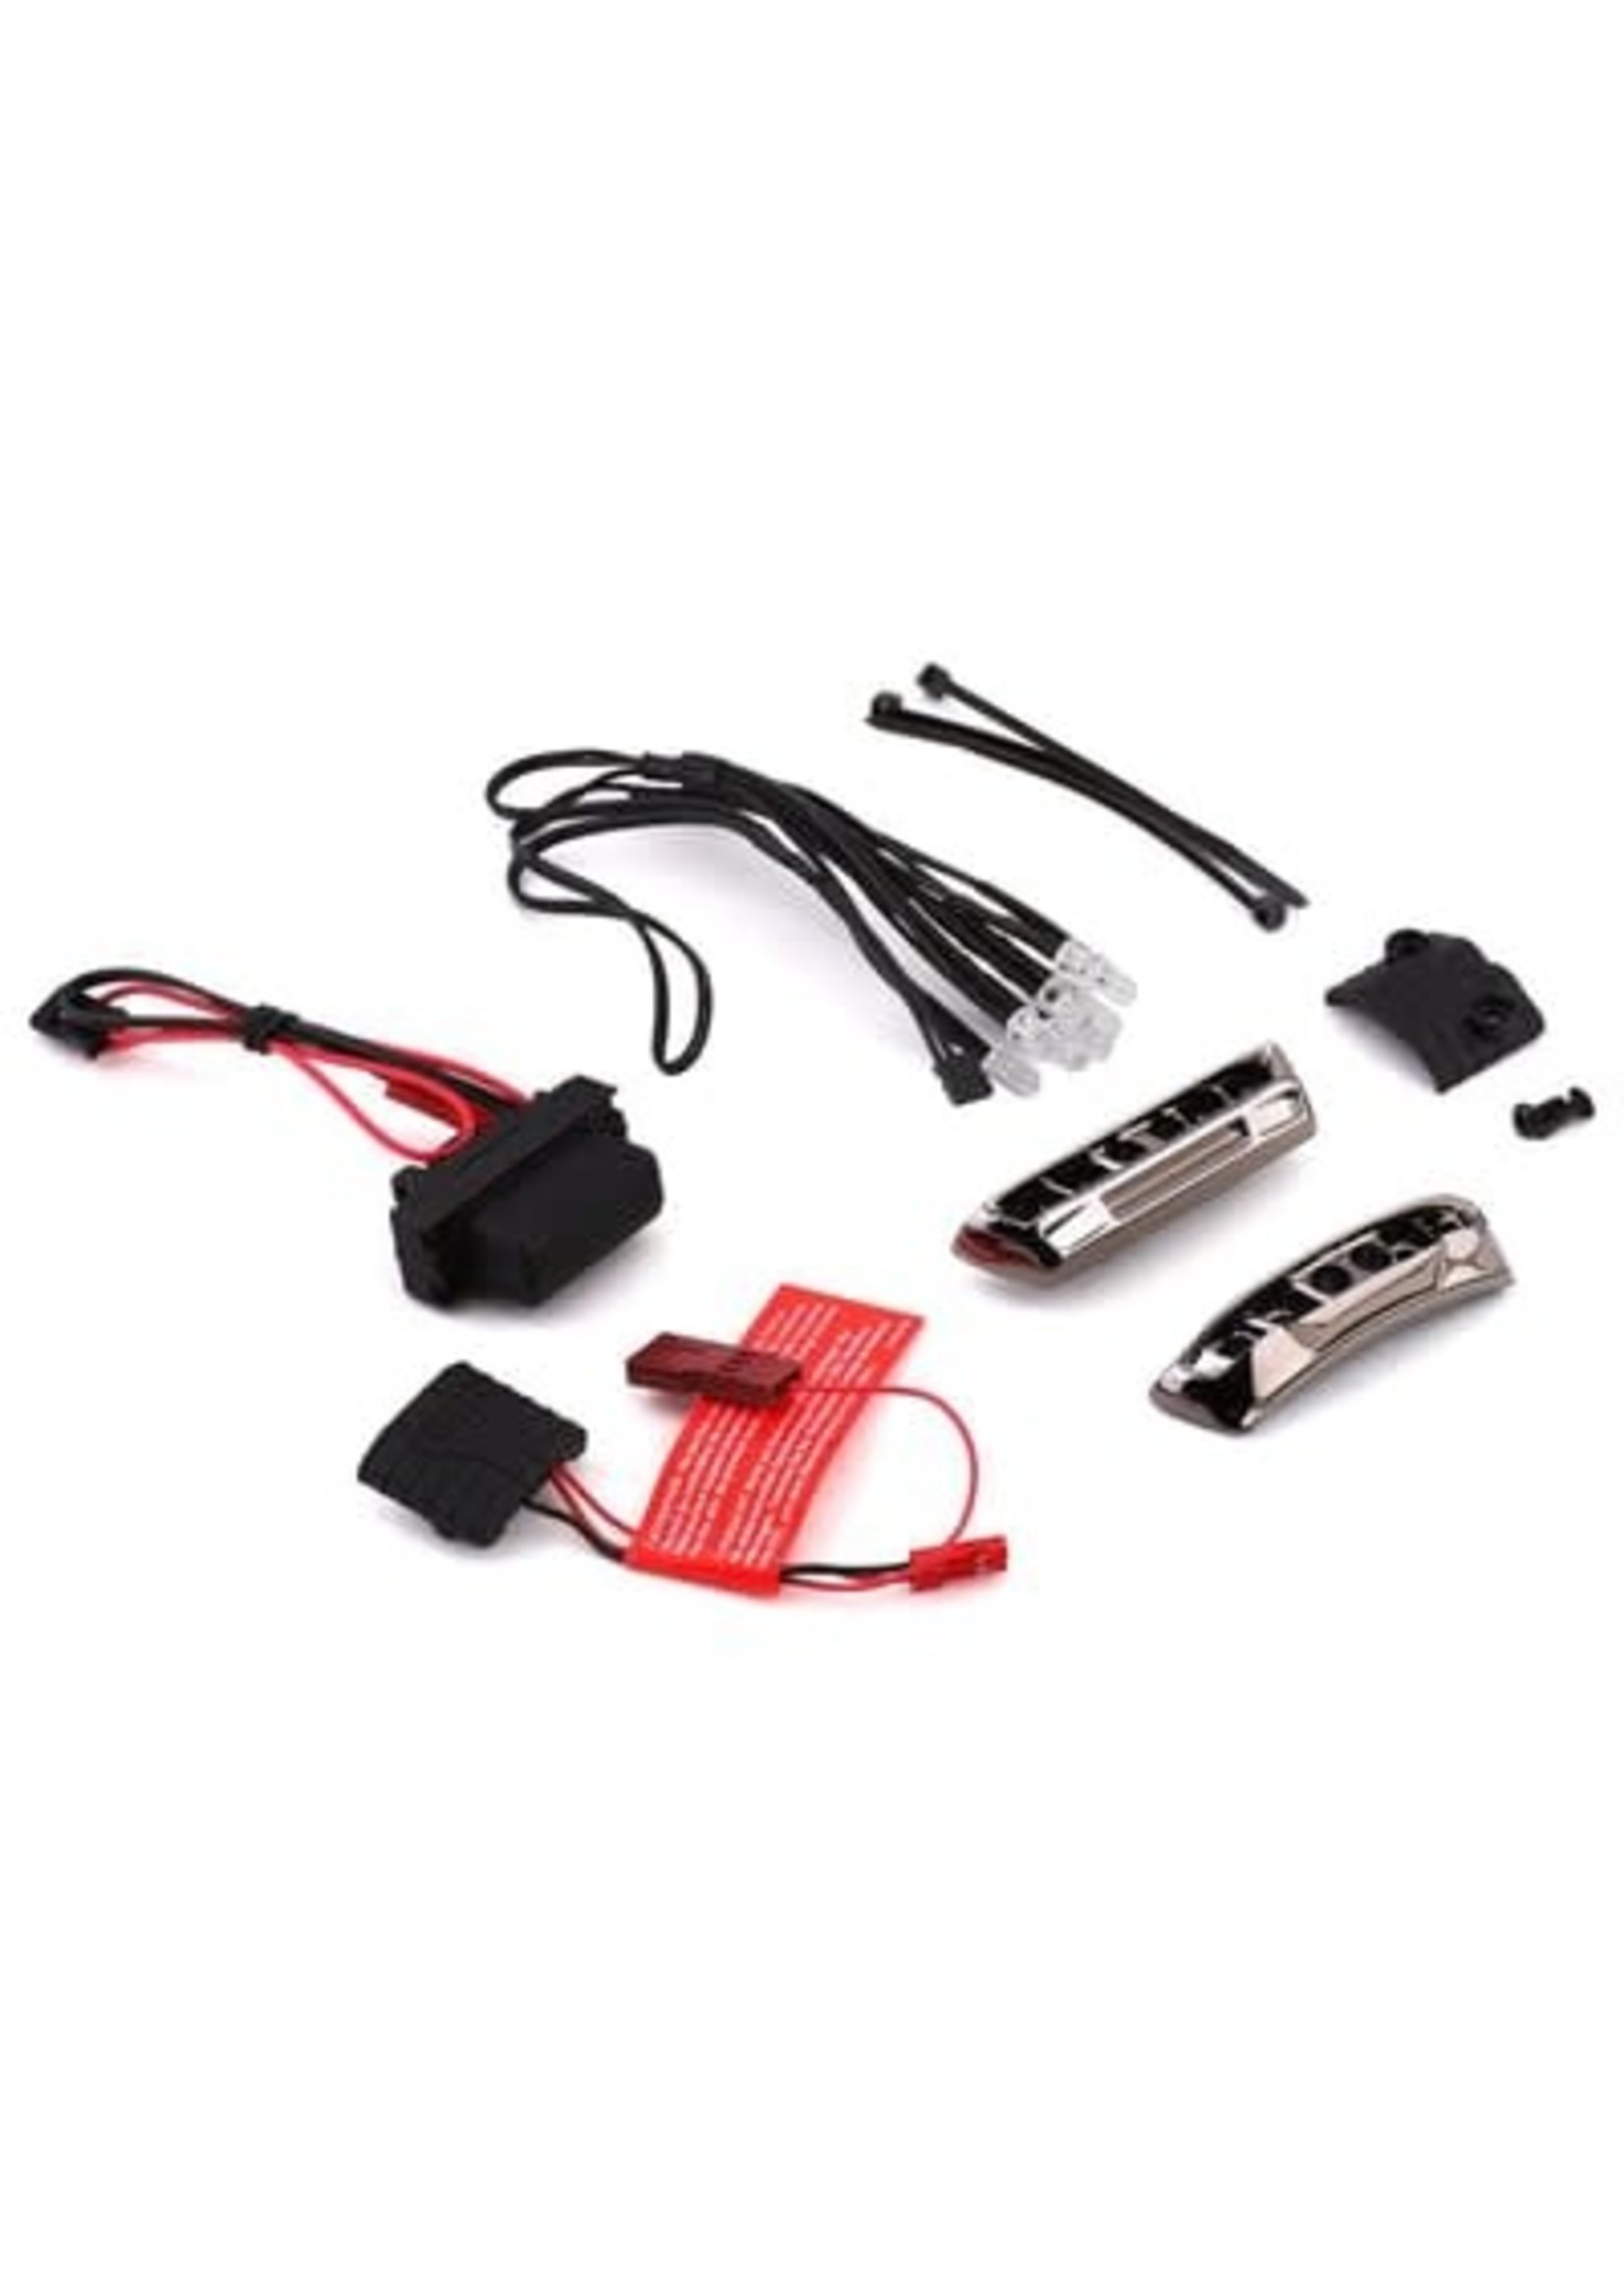 Traxxas 7185A The Traxxas Complete LED Light Kit for the 1/16 scale E-Revo adds four LEDs on the front bumper, and blazes a path through the night. Four red LEDs in the rear bumper let you track progress from behind. A tightly regulated power supply prevents flic